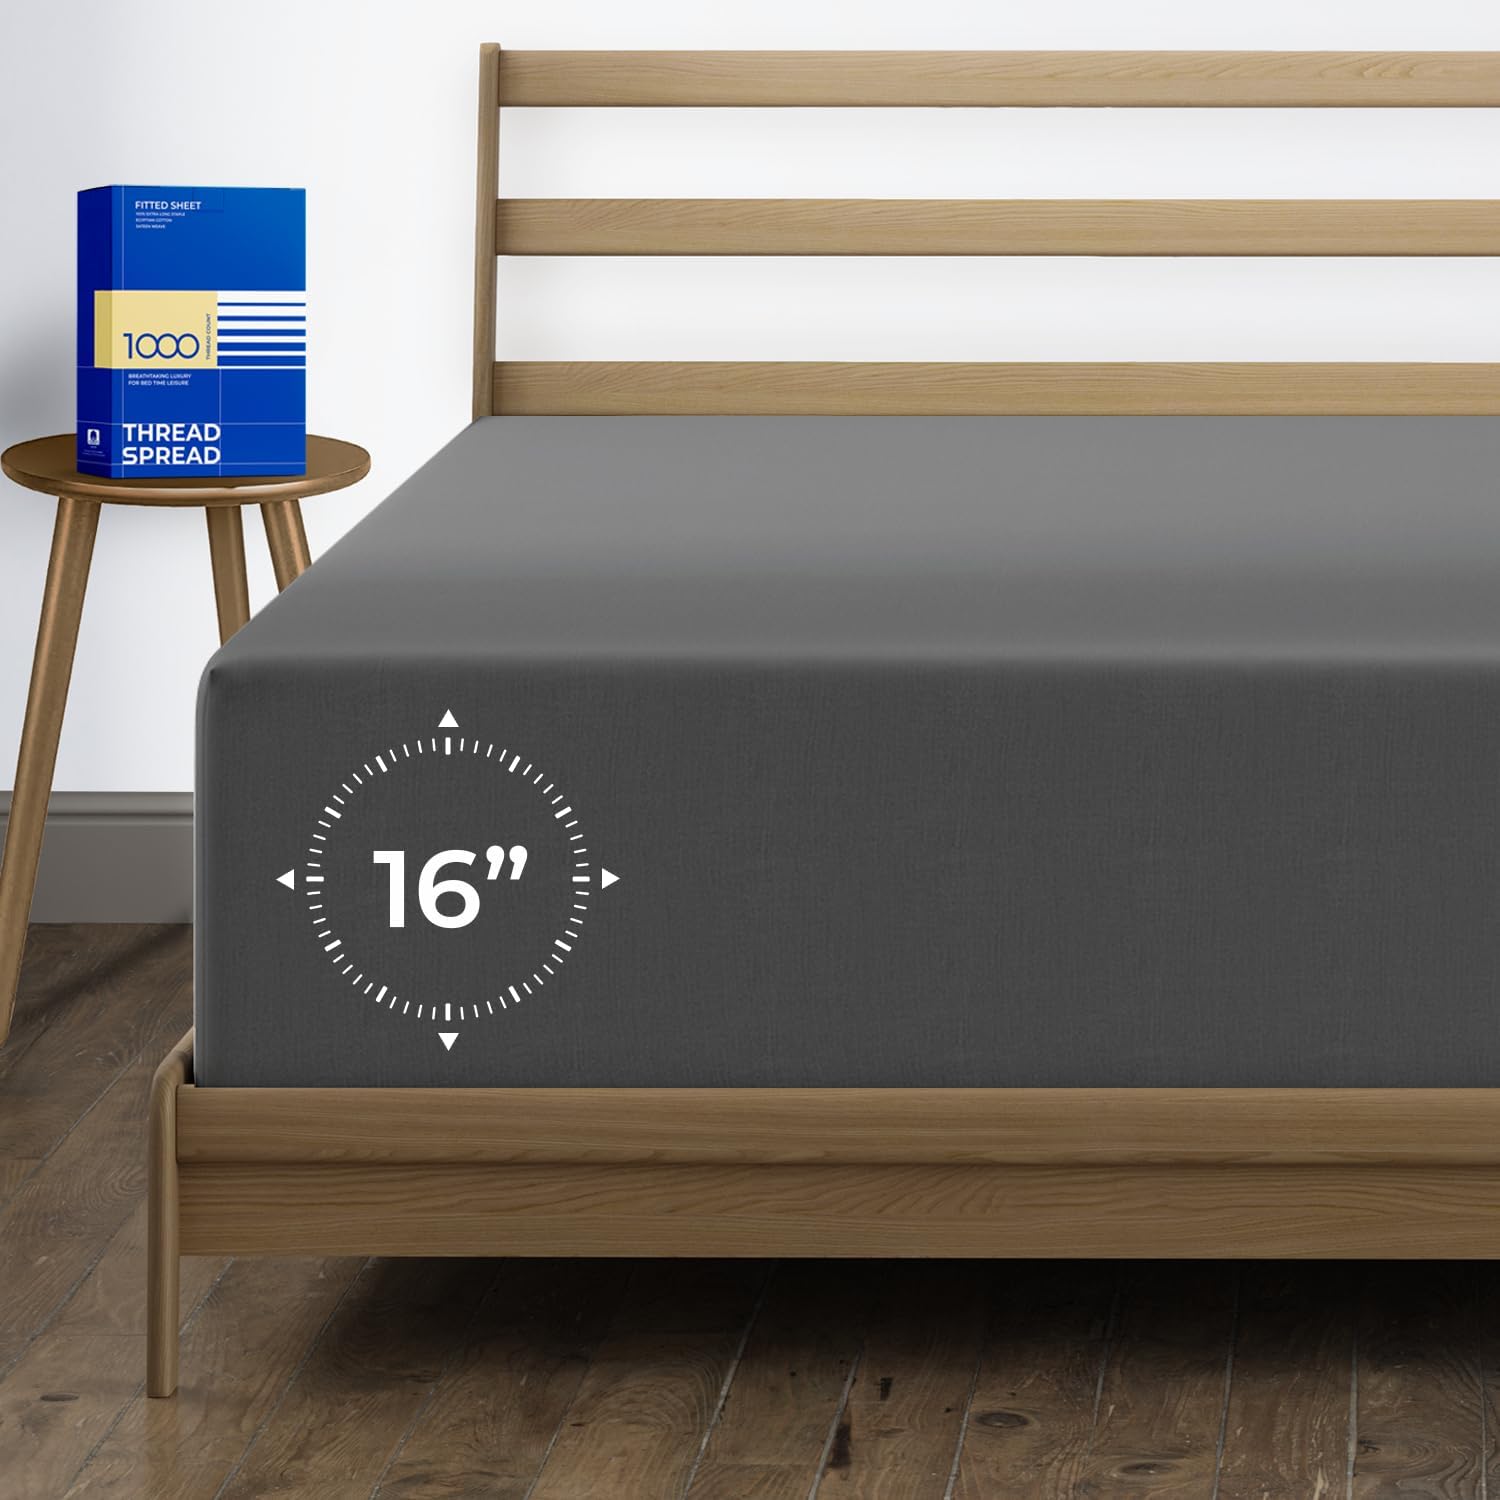 Thread Spread carefully selected high-quality pure cotton mattress for you, made of 100% pure cotton long staple cotton, soft and comfortable, good air permeability, so that you have a comfortable sleep experience.